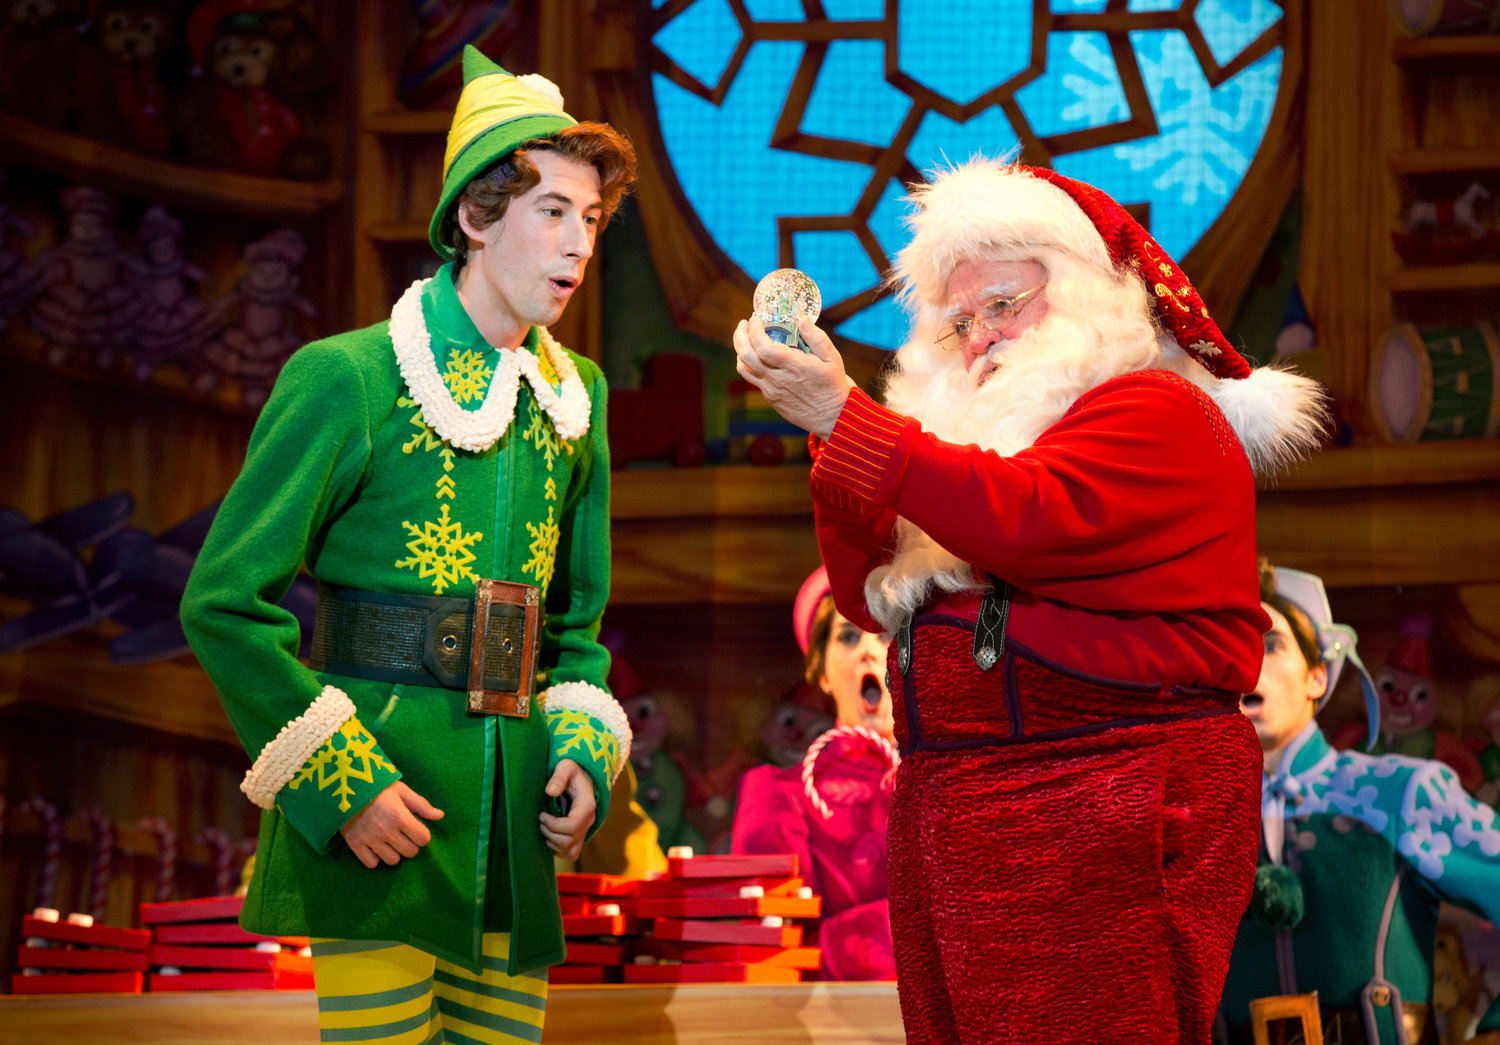 Santa (Mark Fishback) holds up a snow globe for Buddy (Cody Garcia) to see in a scene from “Elf: The Musical.”